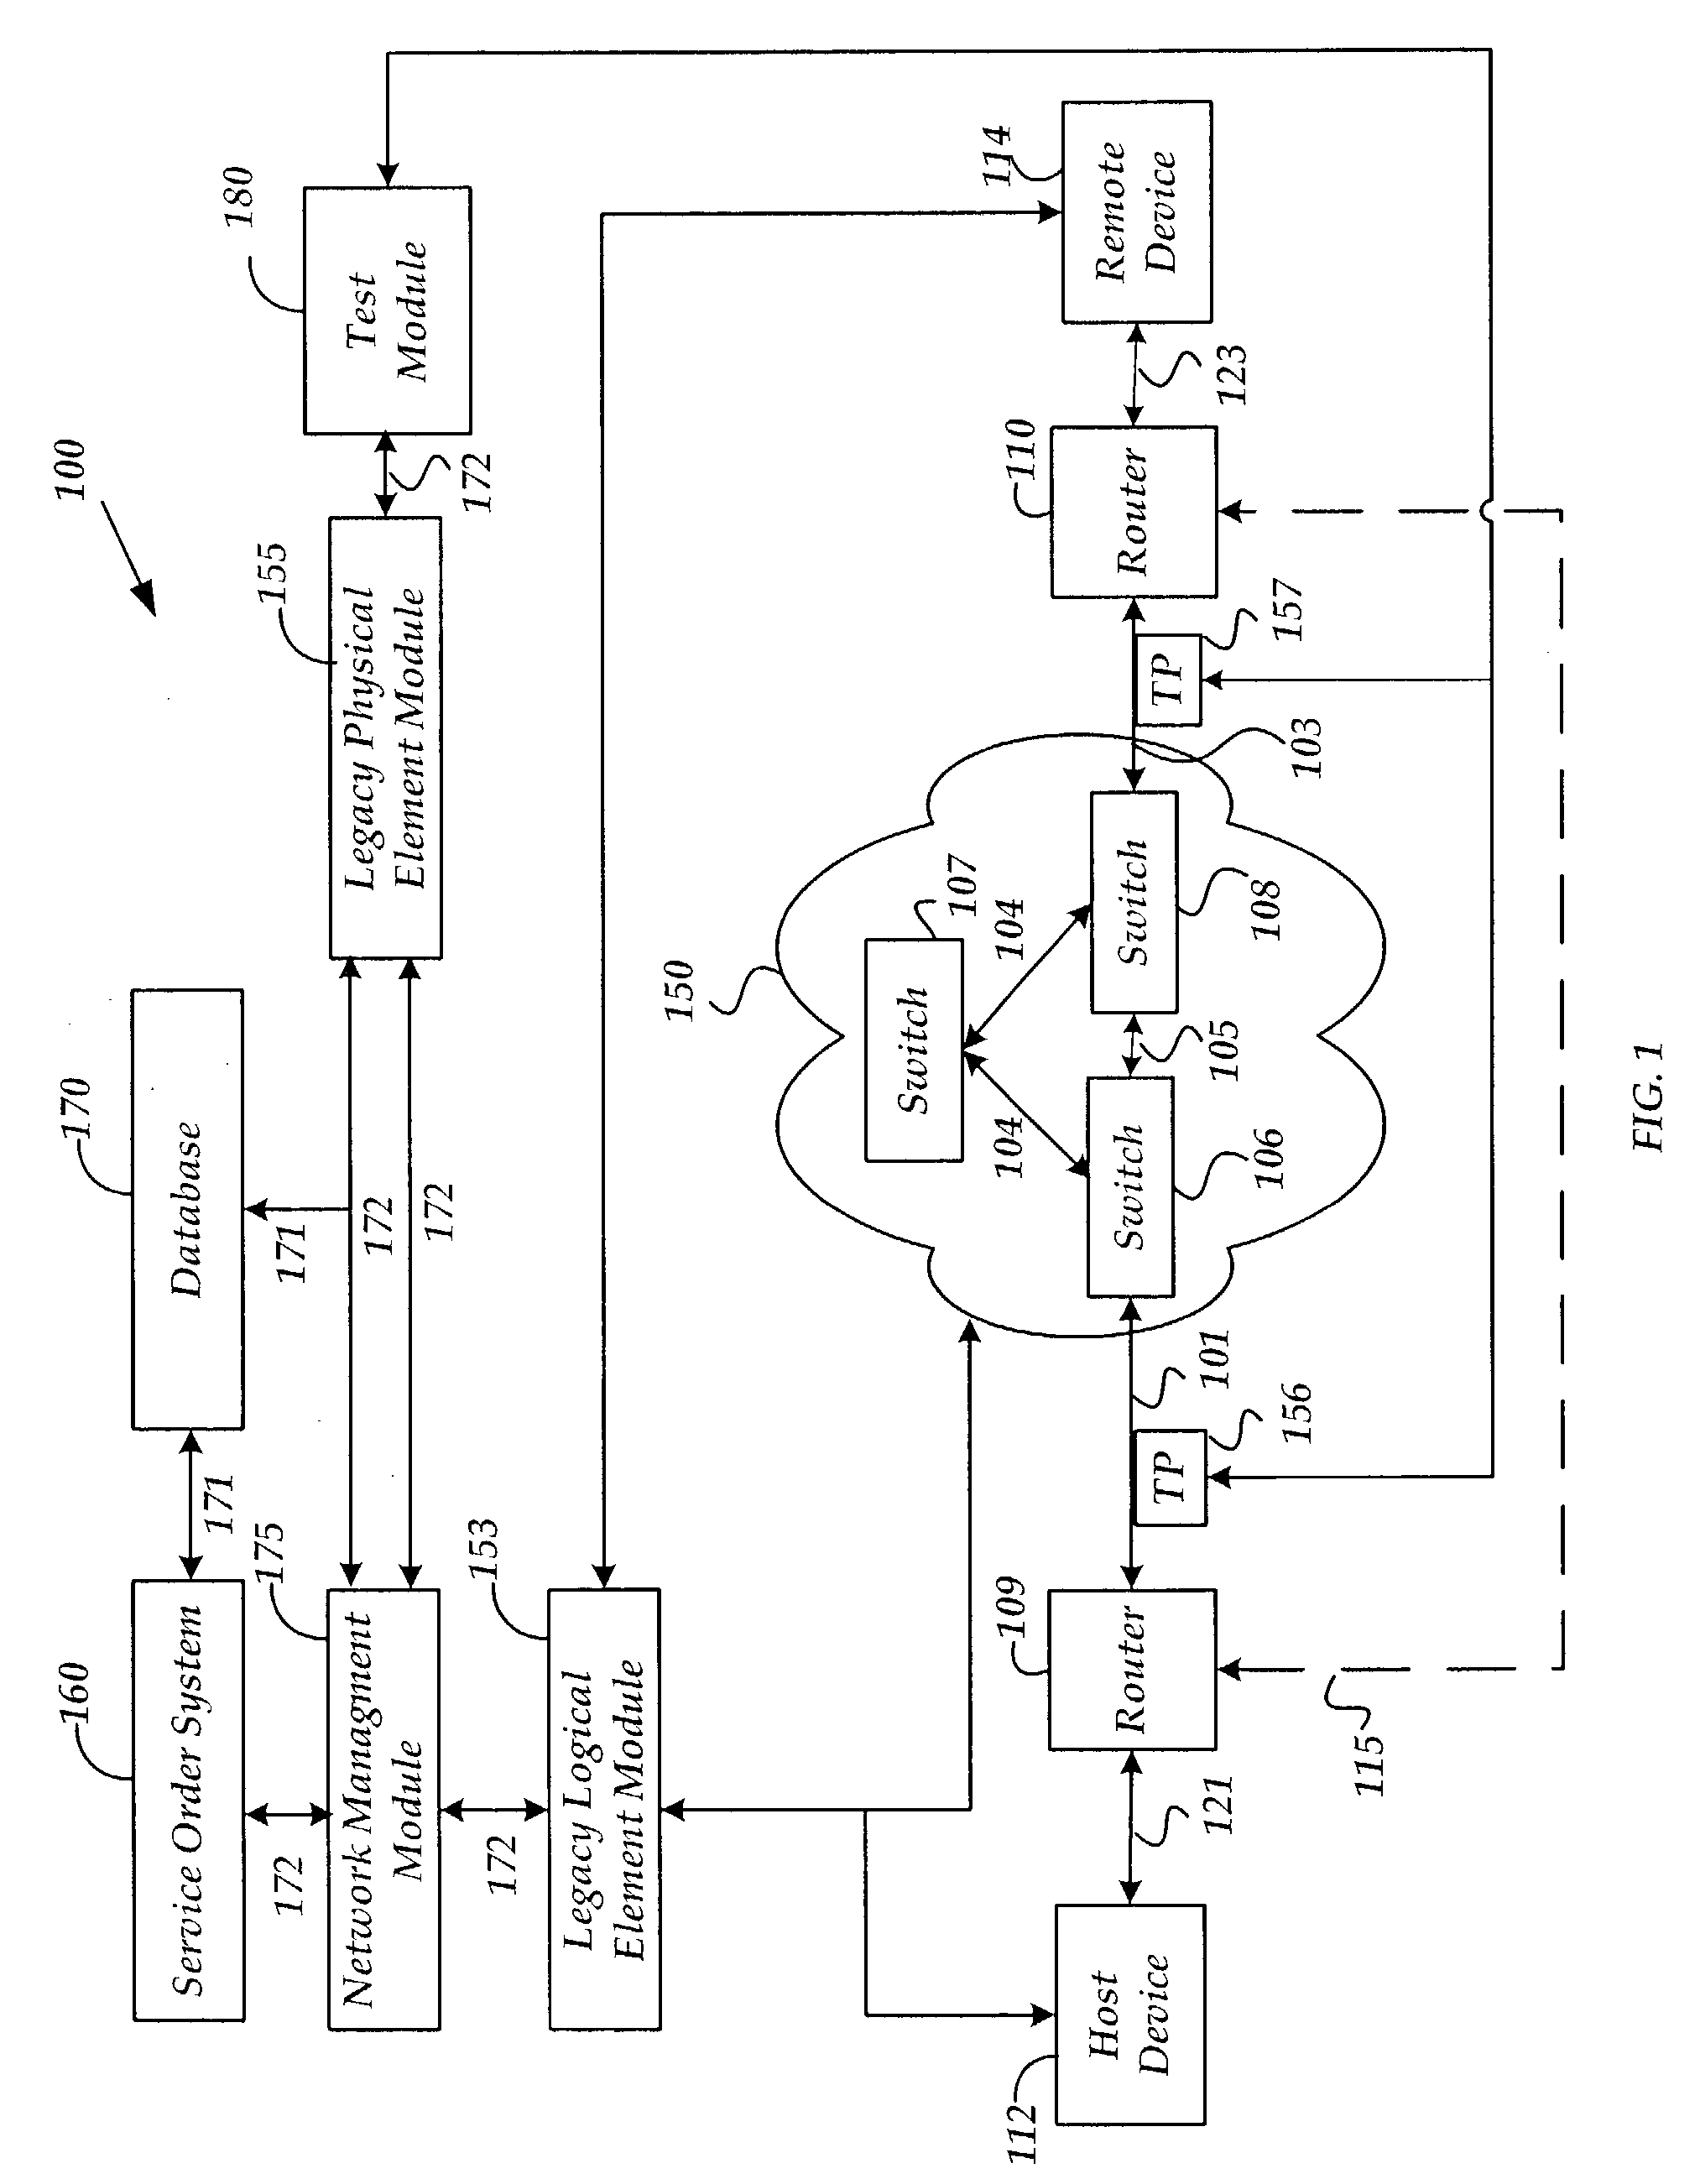 Method and system for provisioning and maintaining a circuit in a data network